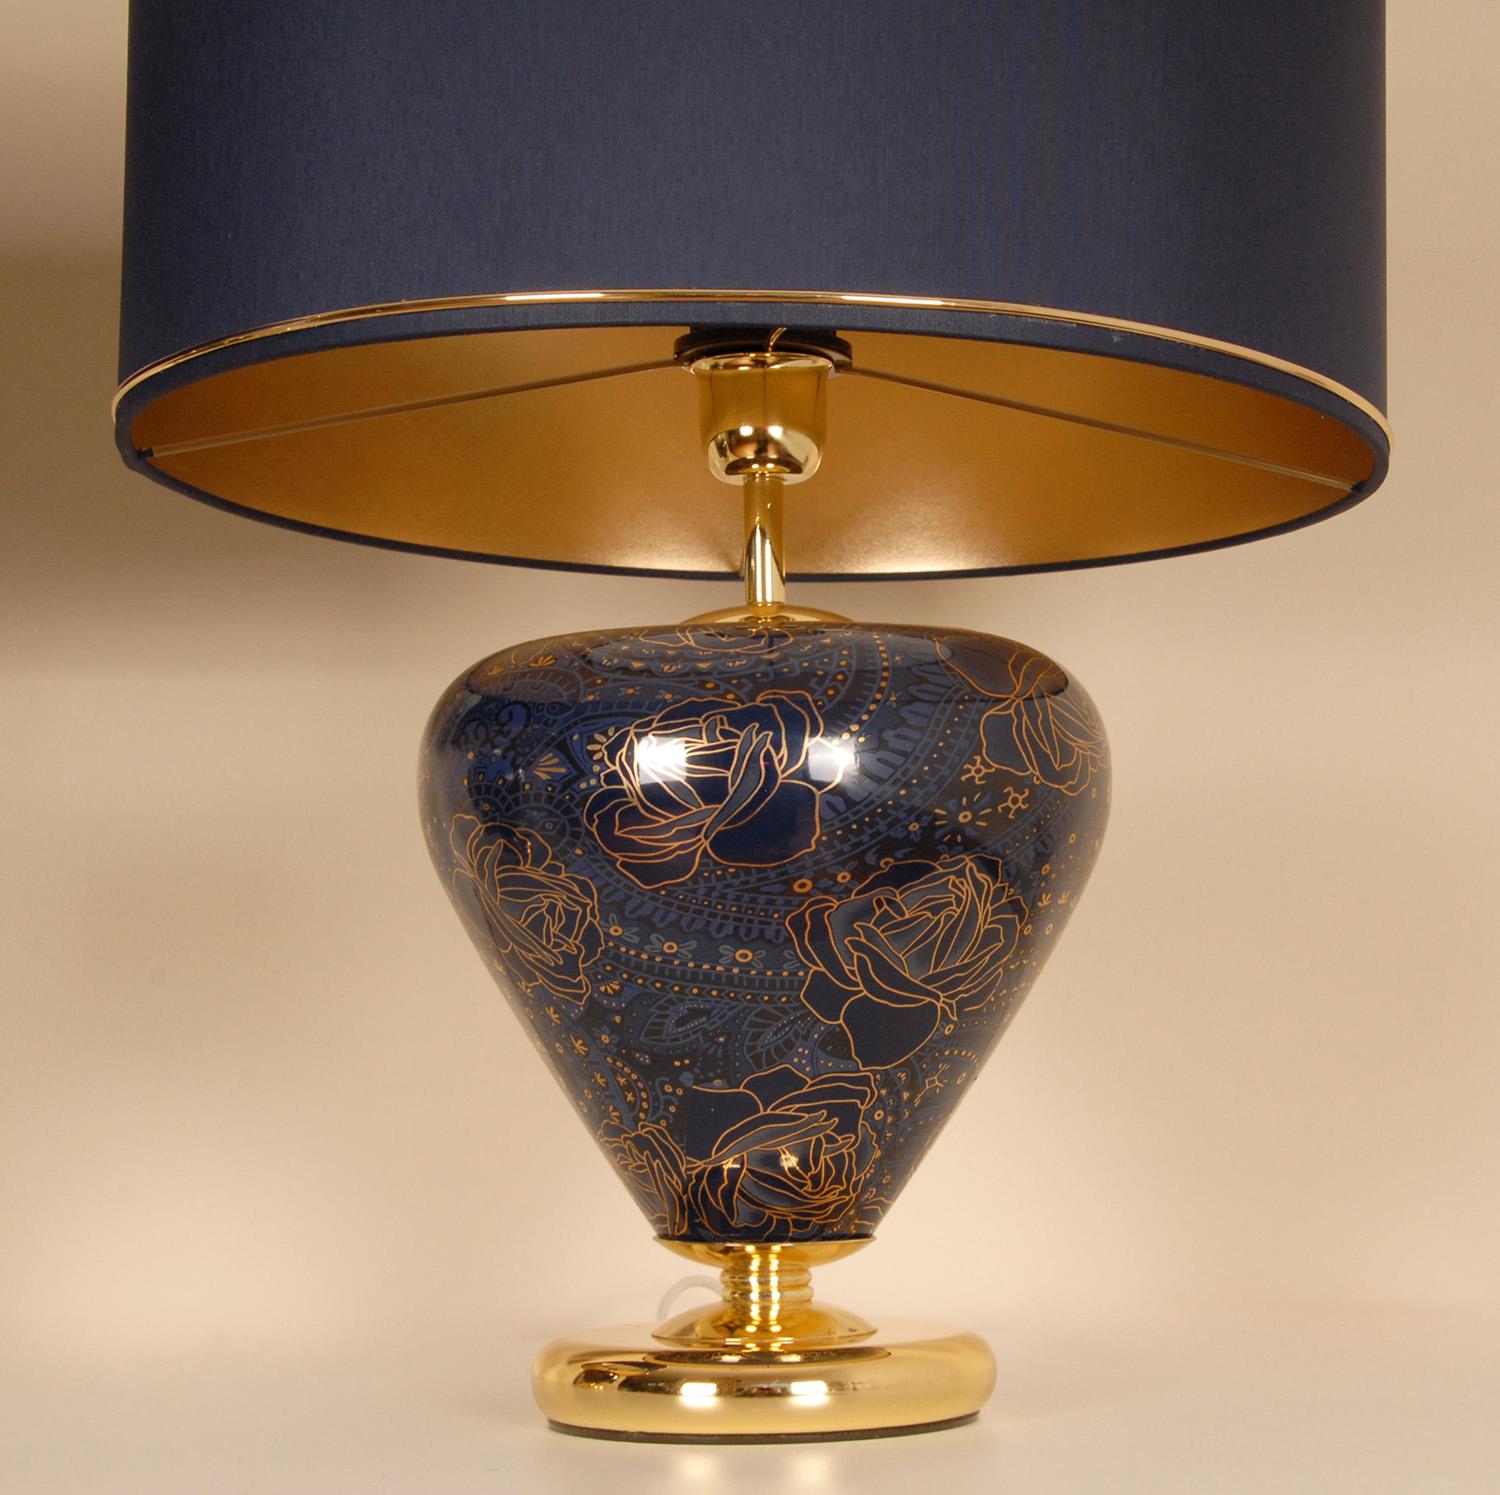 Vintage Mid Century Chinoiserie Cobalt Blue and Gold Ceramic Table Lamps Italy 1970s - a Pair
Impressive en enchanting blue and gold table lamps.
Marked ACF Italy beneath the base, Inspired by the Cobalt blue Sevres porcelain
Design: In the manner